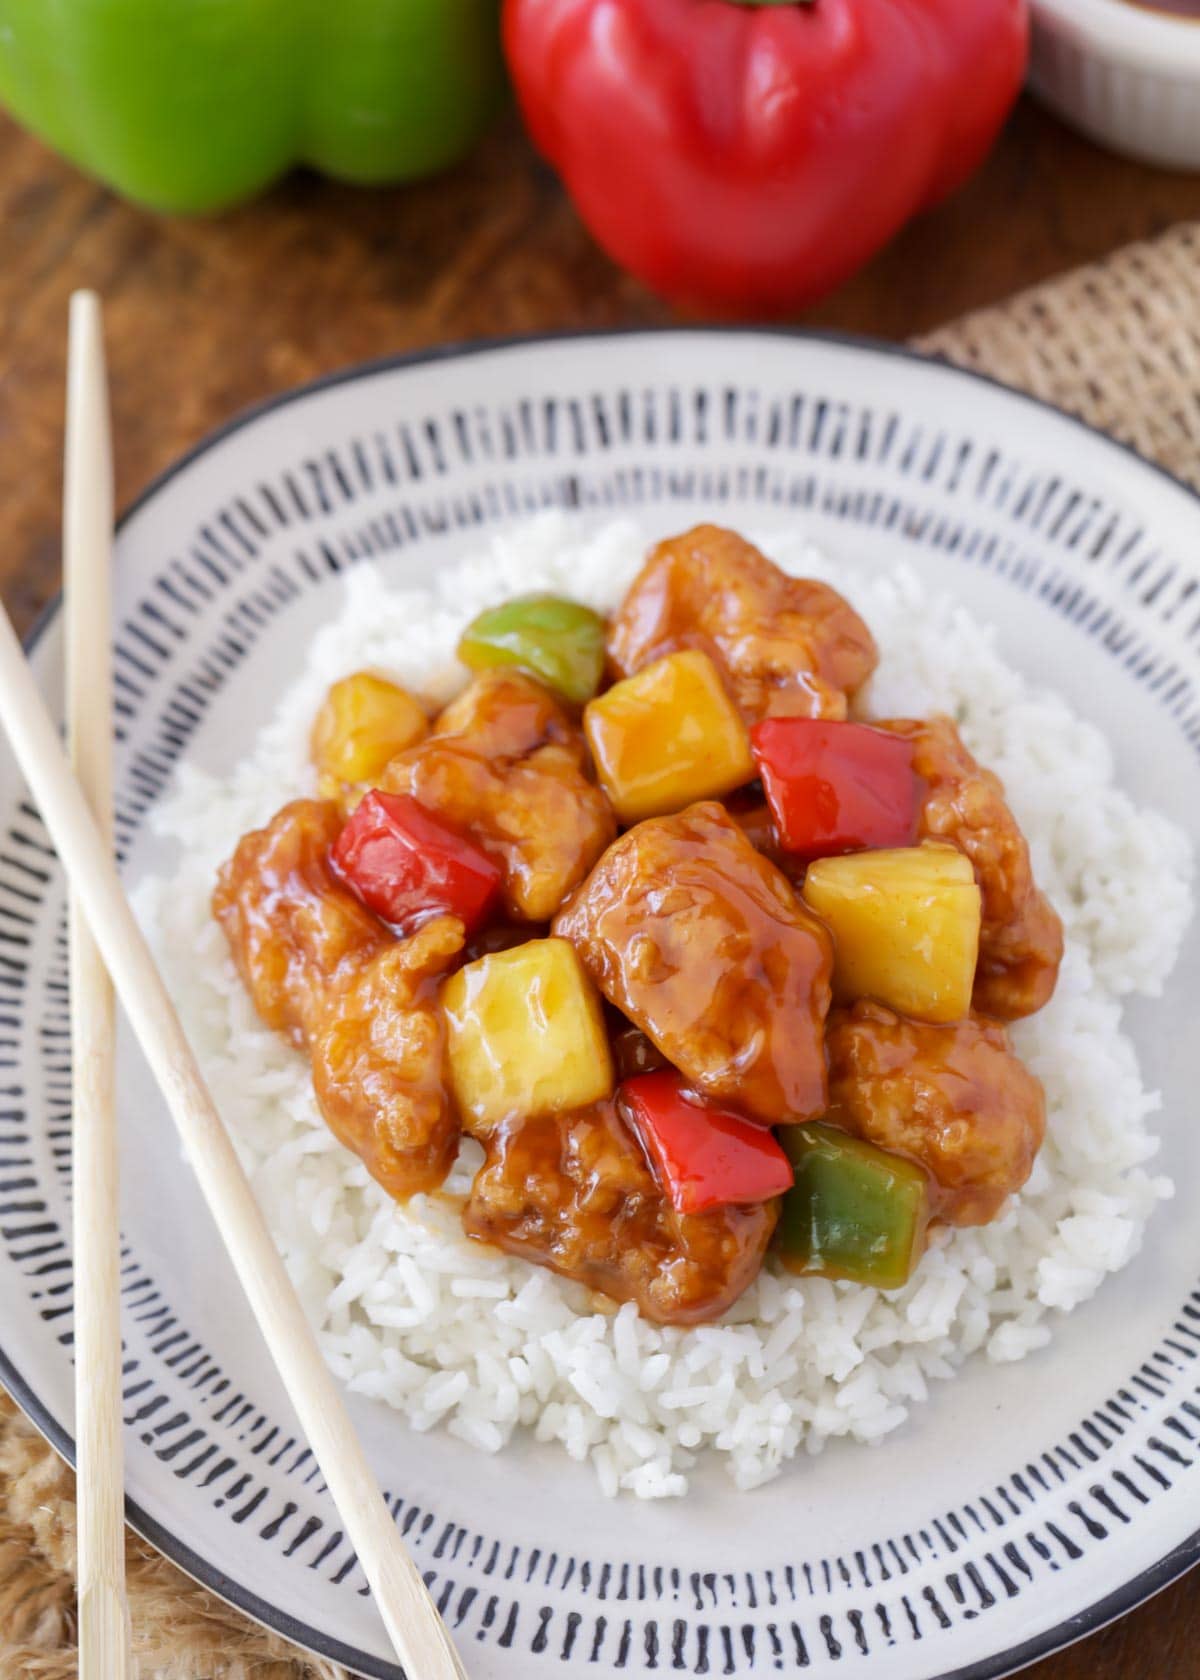 Best Sweet and Sour Chicken Recipe {+ Video}